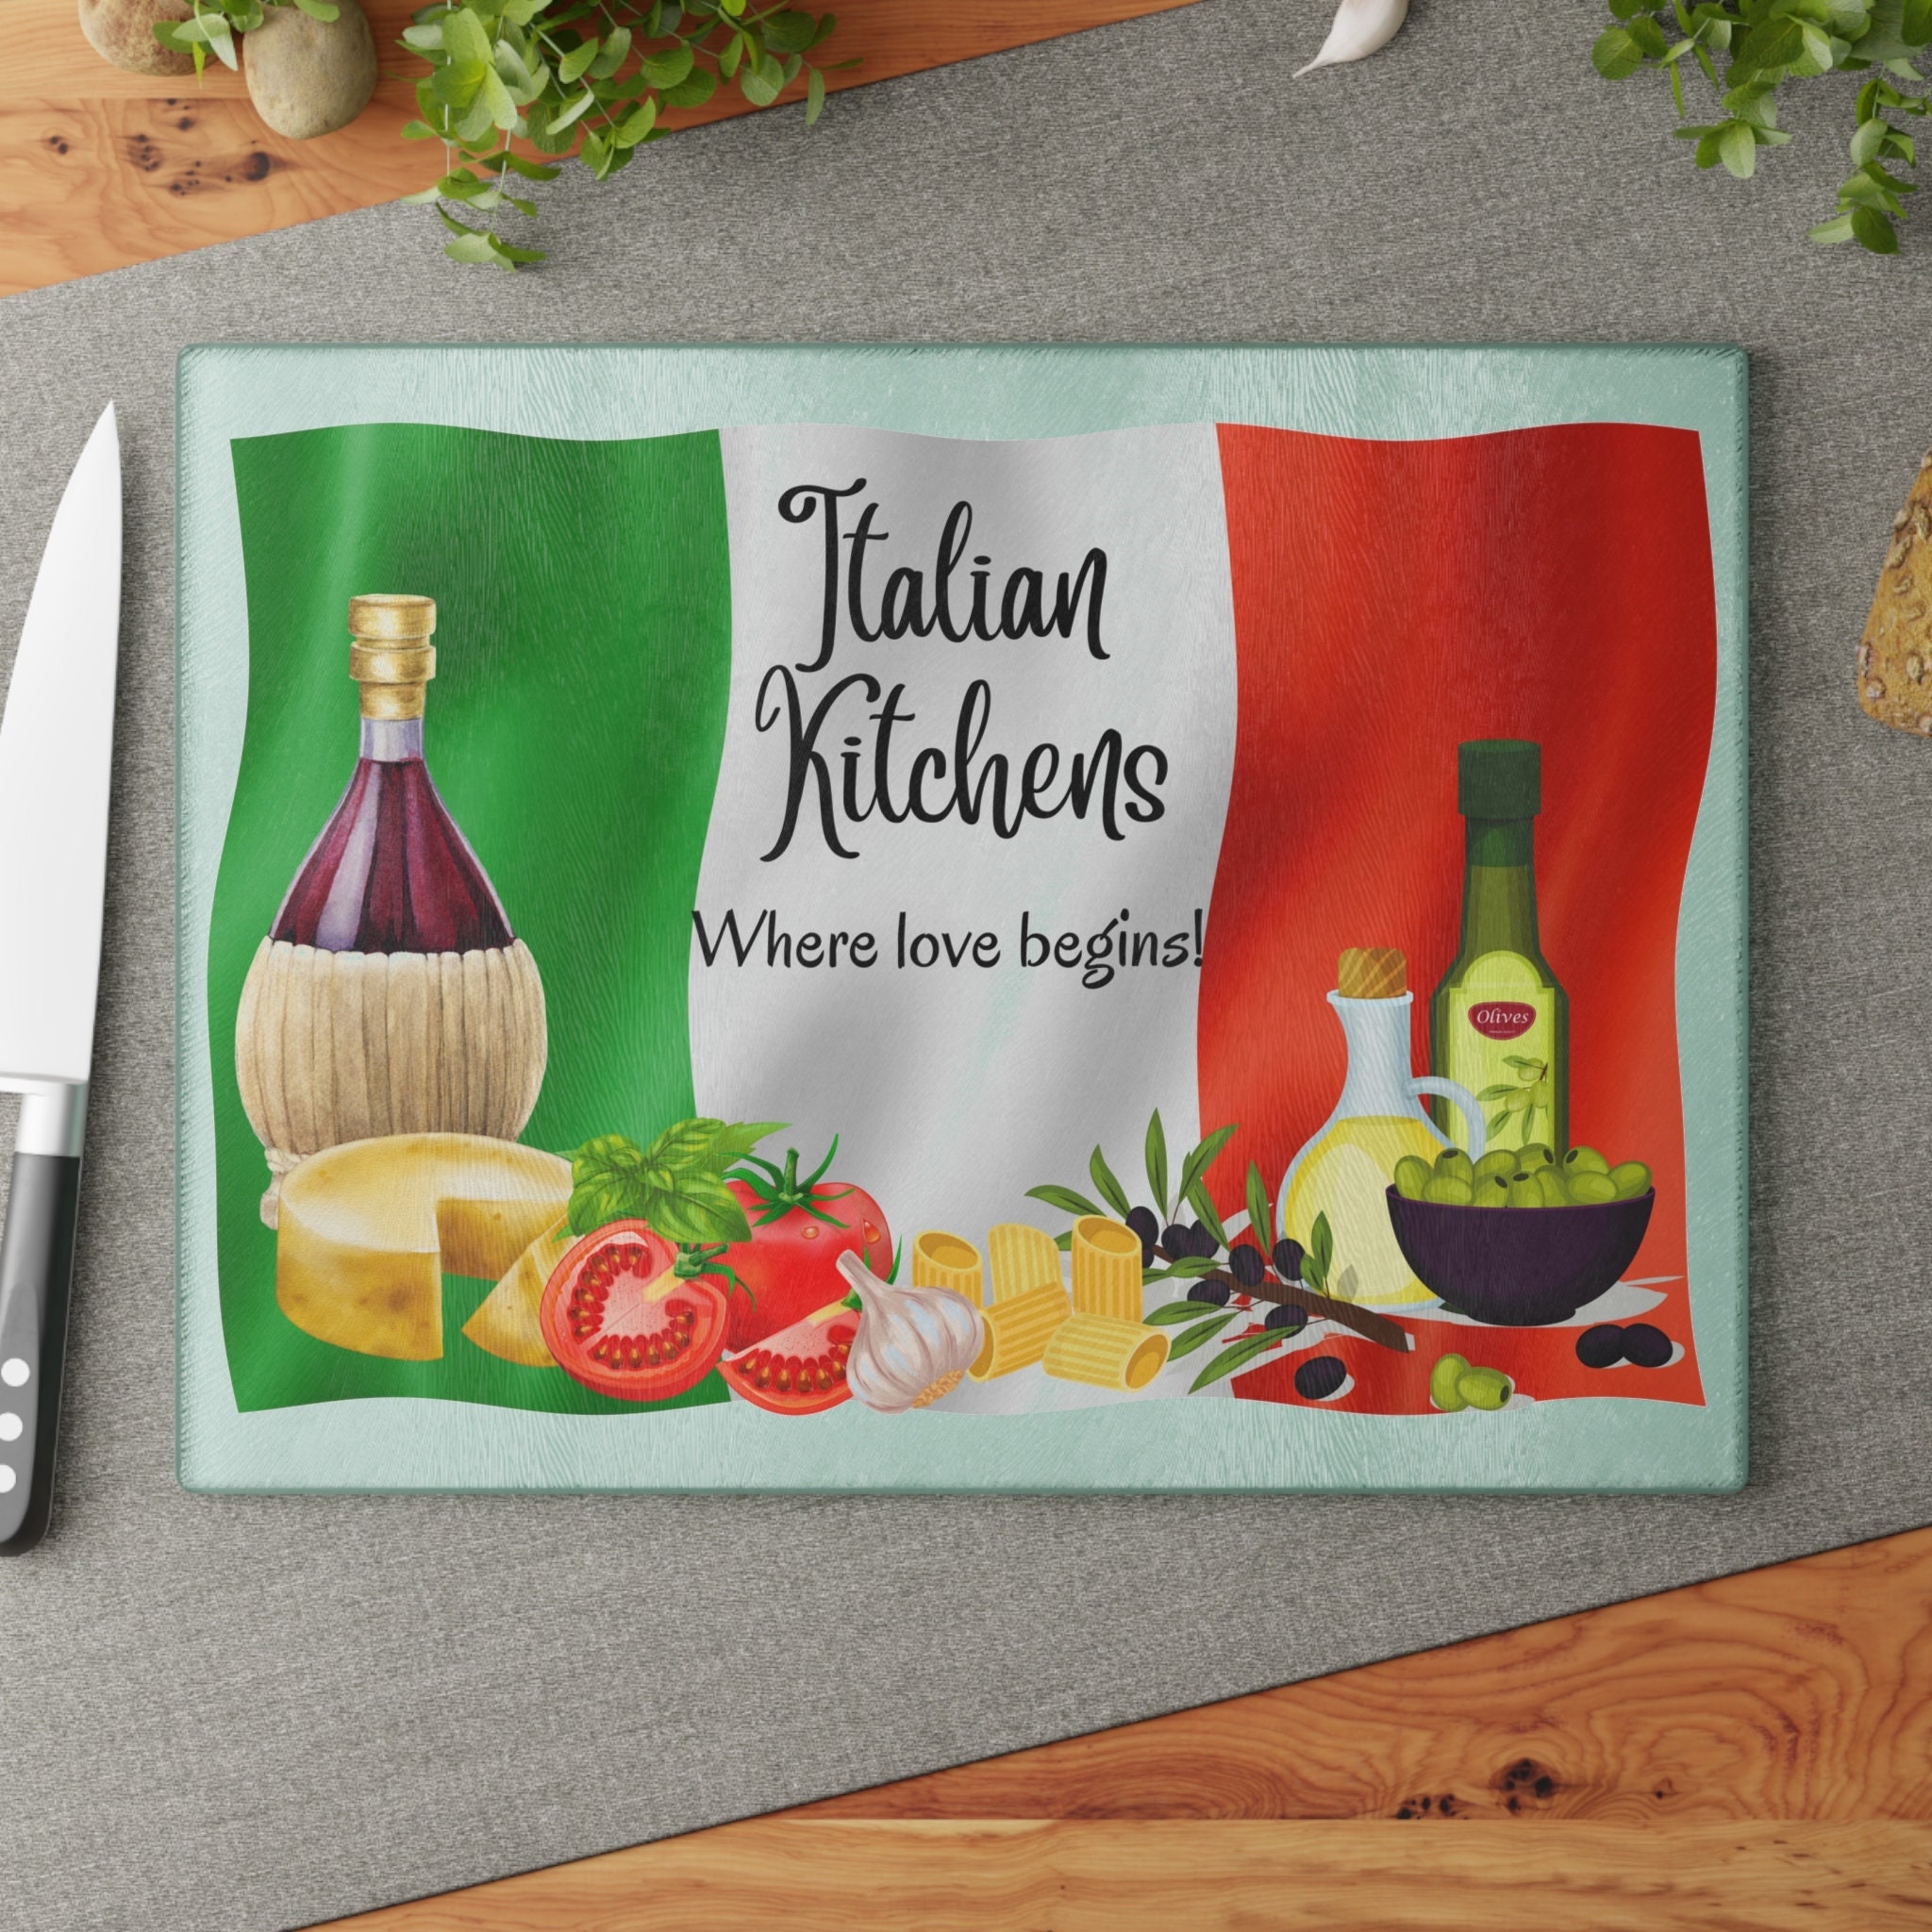 Gifts Under $50 for Aspiring Chefs or Home Cooks - La Cucina Italiana